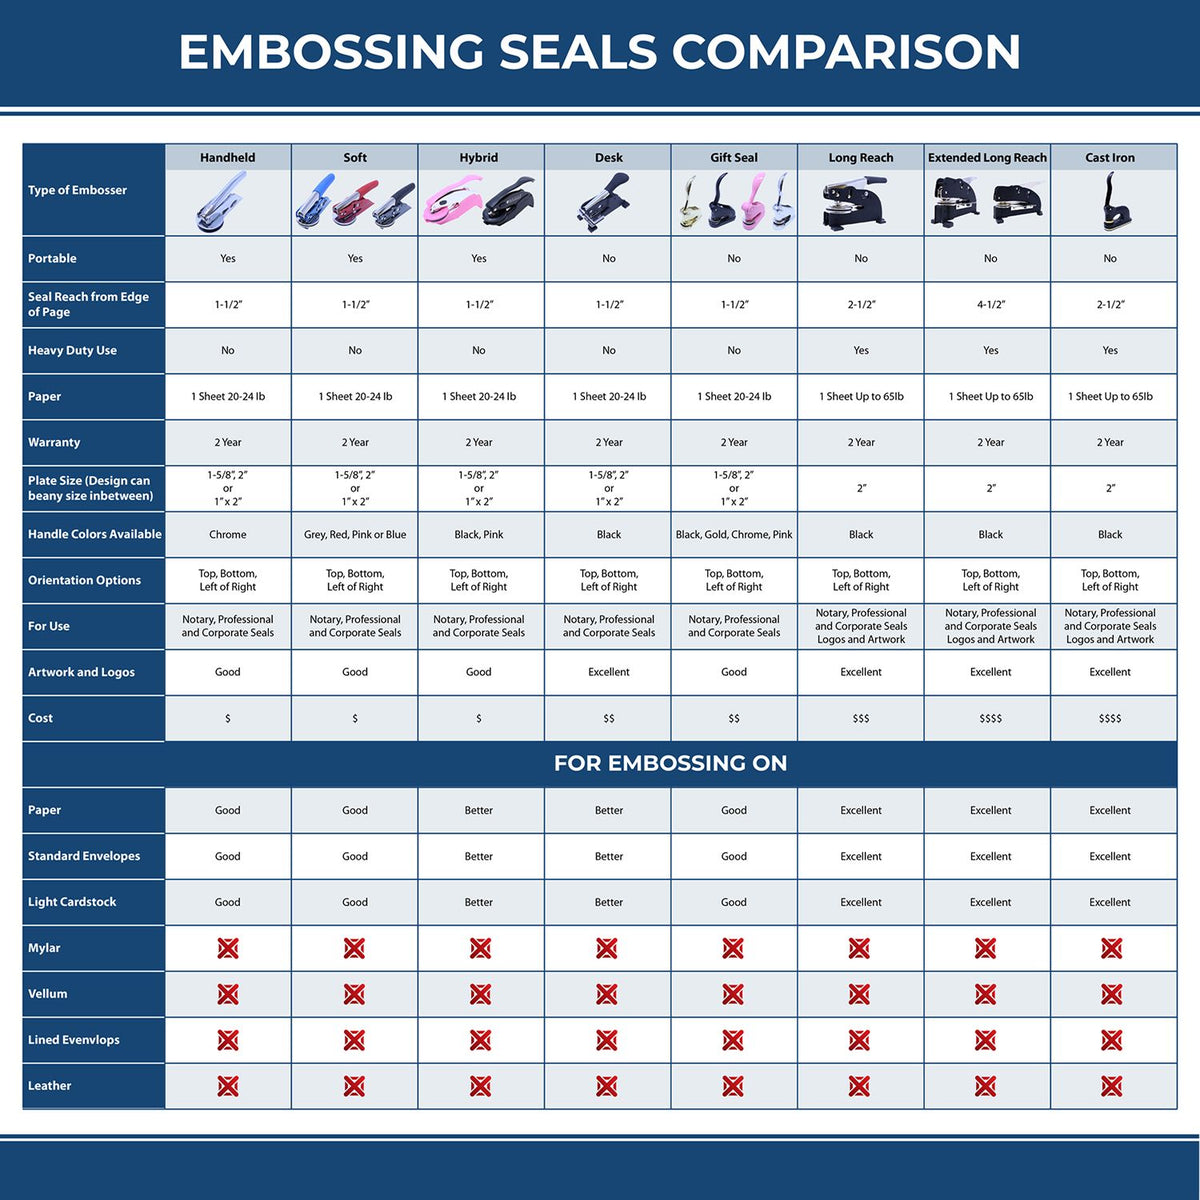 A comparison chart for the different types of mount models available for the Hybrid South Carolina Geologist Seal